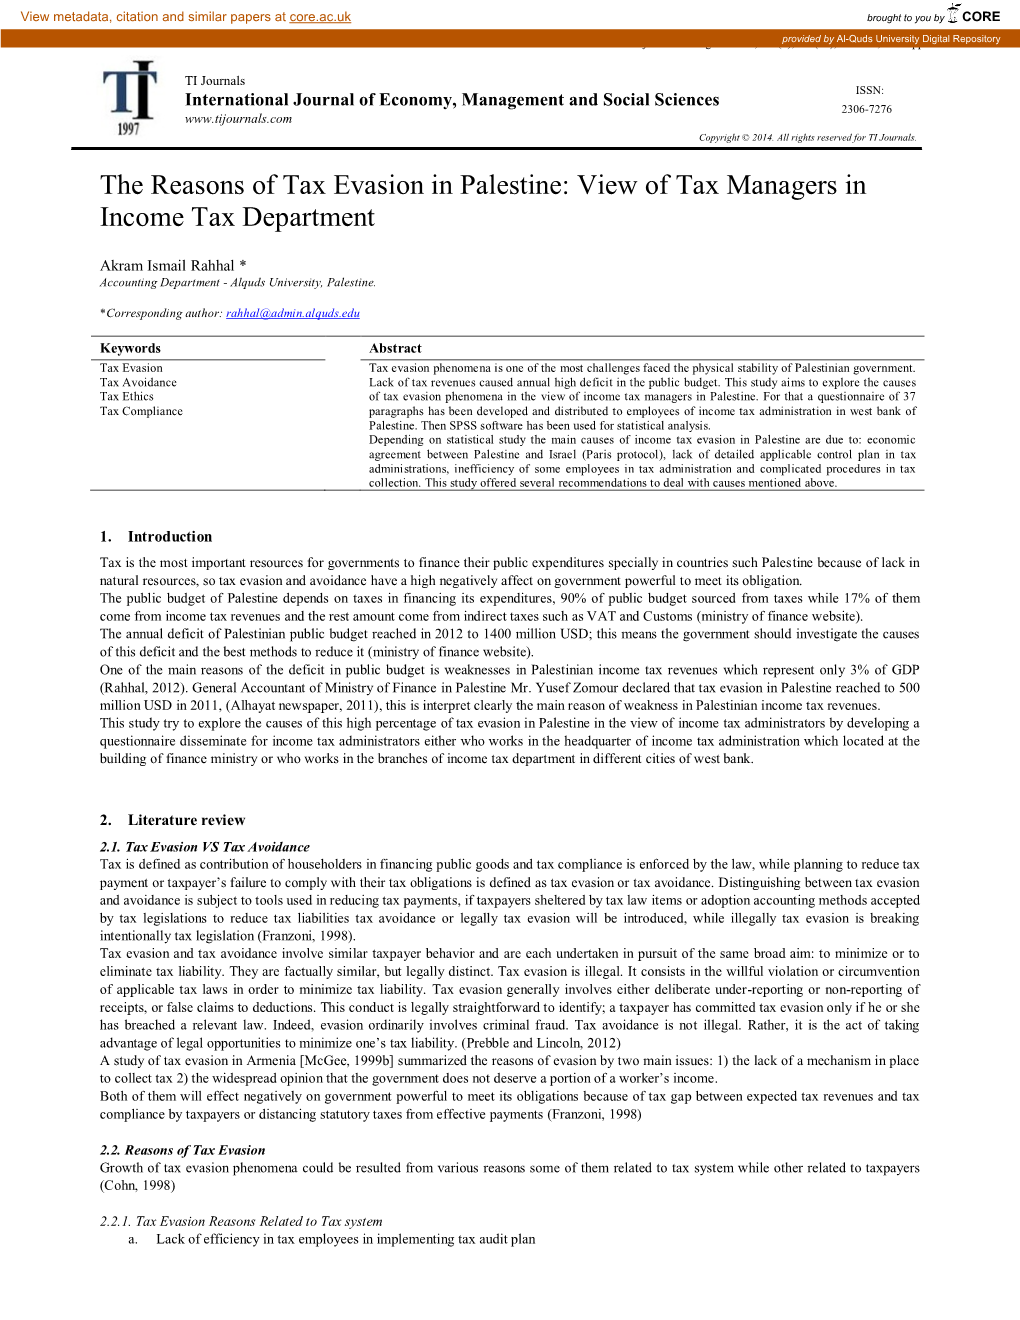 The Reasons of Tax Evasion in Palestine: View of Tax Managers in Income Tax Department